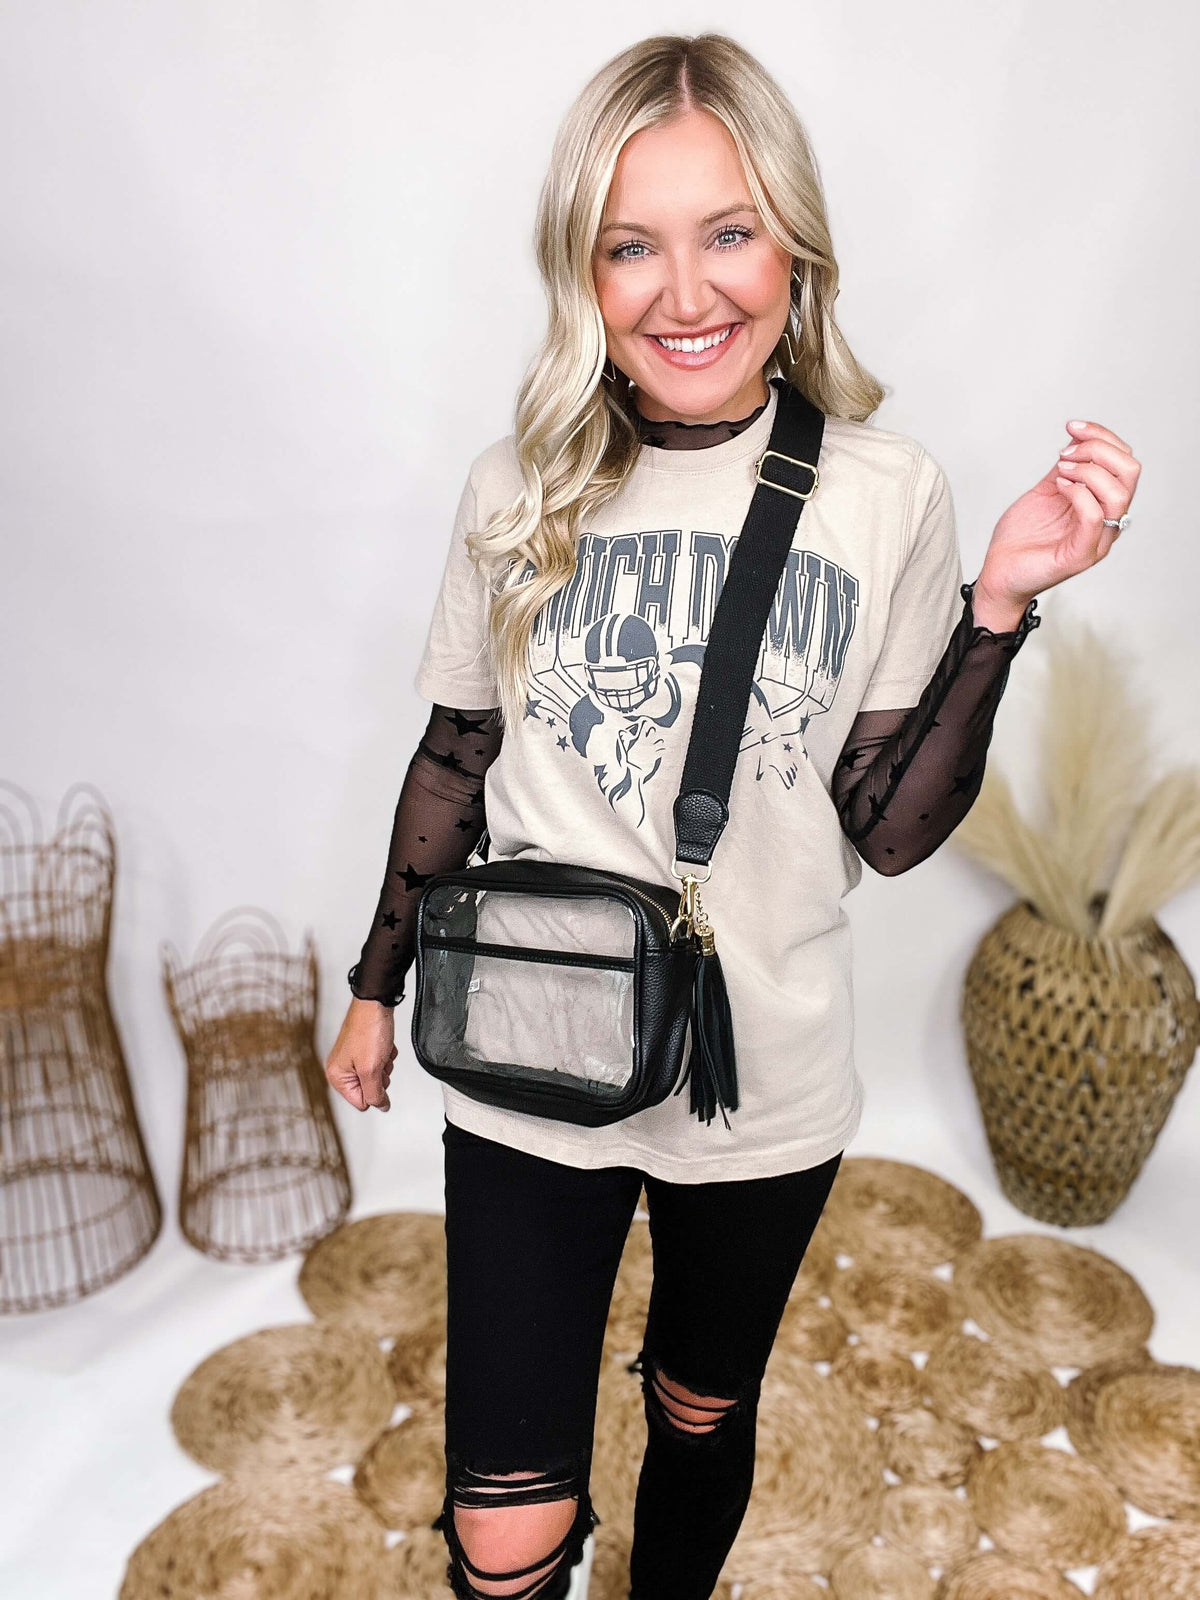 Clear with Black and Gold Accents Cross PU Cross Body Bag Leather Walls and Trim Detachable Black Leather Tassel Full Zipper Closure One Outer Open Pocket Detachable Canvas Strap Approximately 6.5" T x 10" L x 2.5" W Strap Drop 15" - 24" L